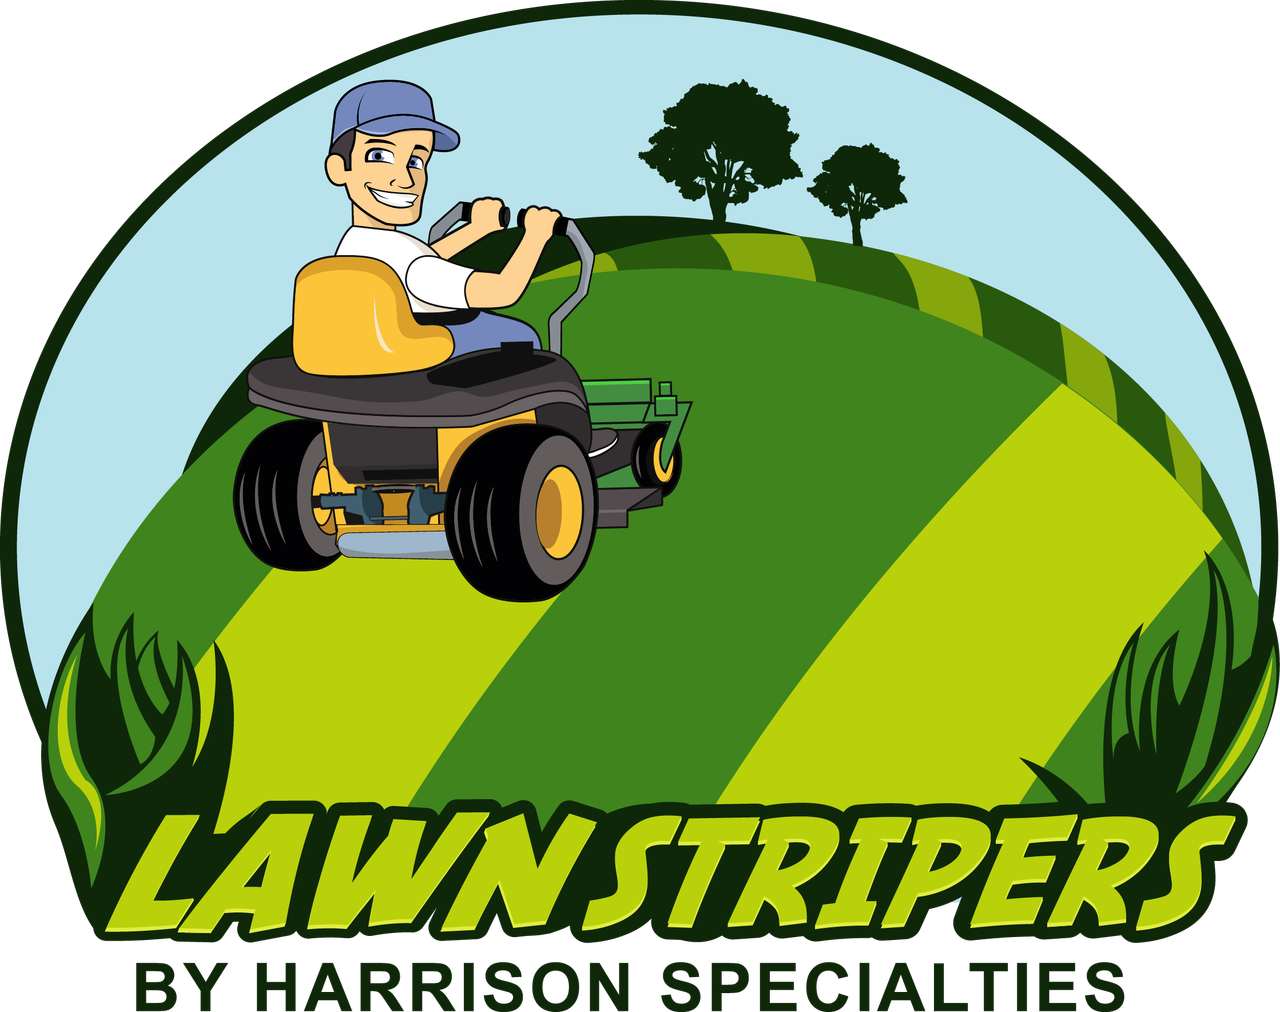 Lawn Striper for Toro 500 Series Commercial Z-Master Turbo Force 52" Deck 2004-2009